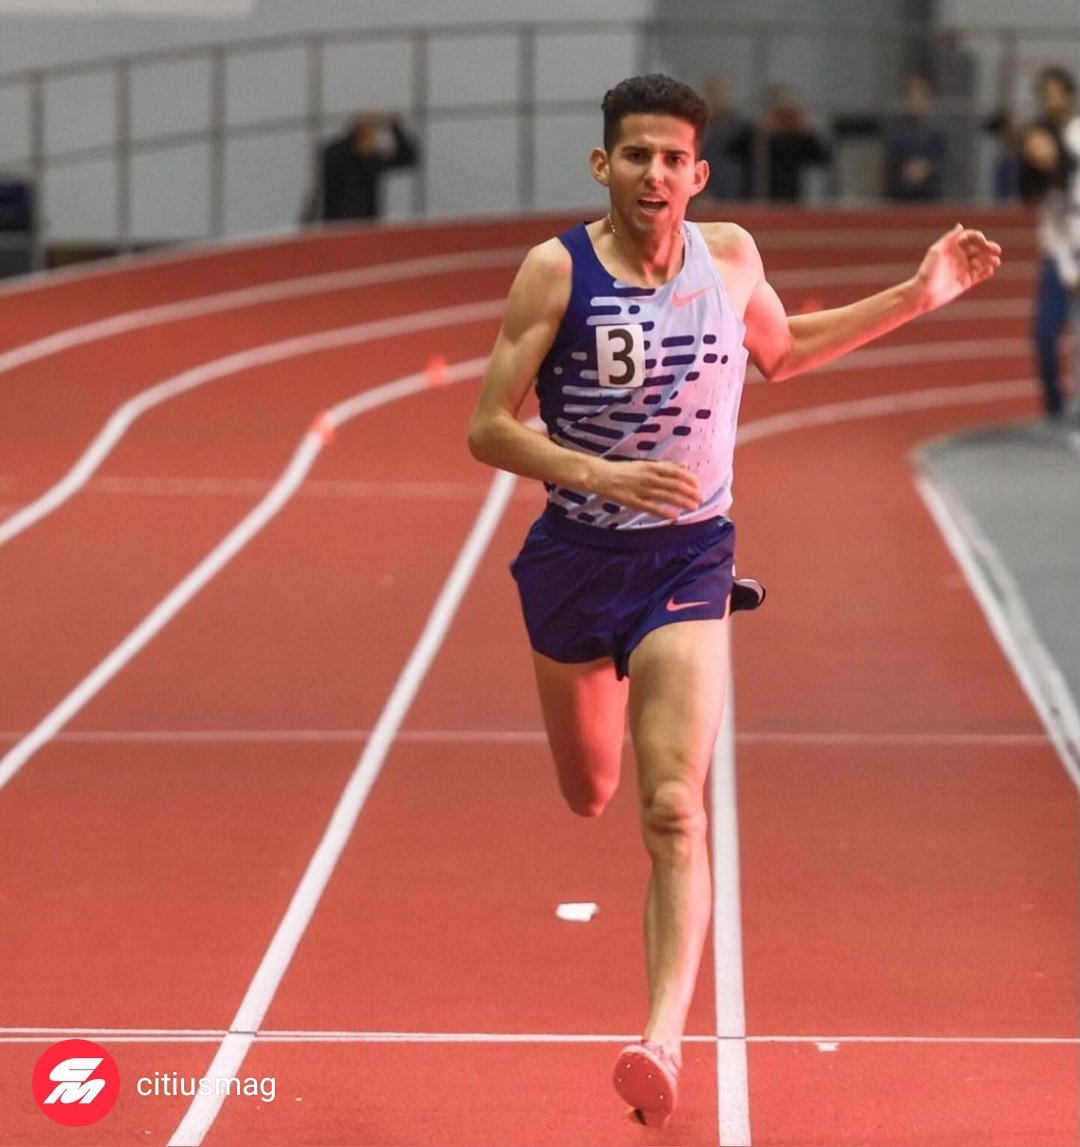 What a run from @Phresh_Fish who clocks a 12:51.84 5000m in Boston🔥 A number of Kimbia athletes followed him home, with @_patrickdever clocking an Olympic standard of 13:04.05, @KemboiAmon40964 running 13:06.30 and Thomas Ratcliffe 13:14.64. 📸 @CitiusMag